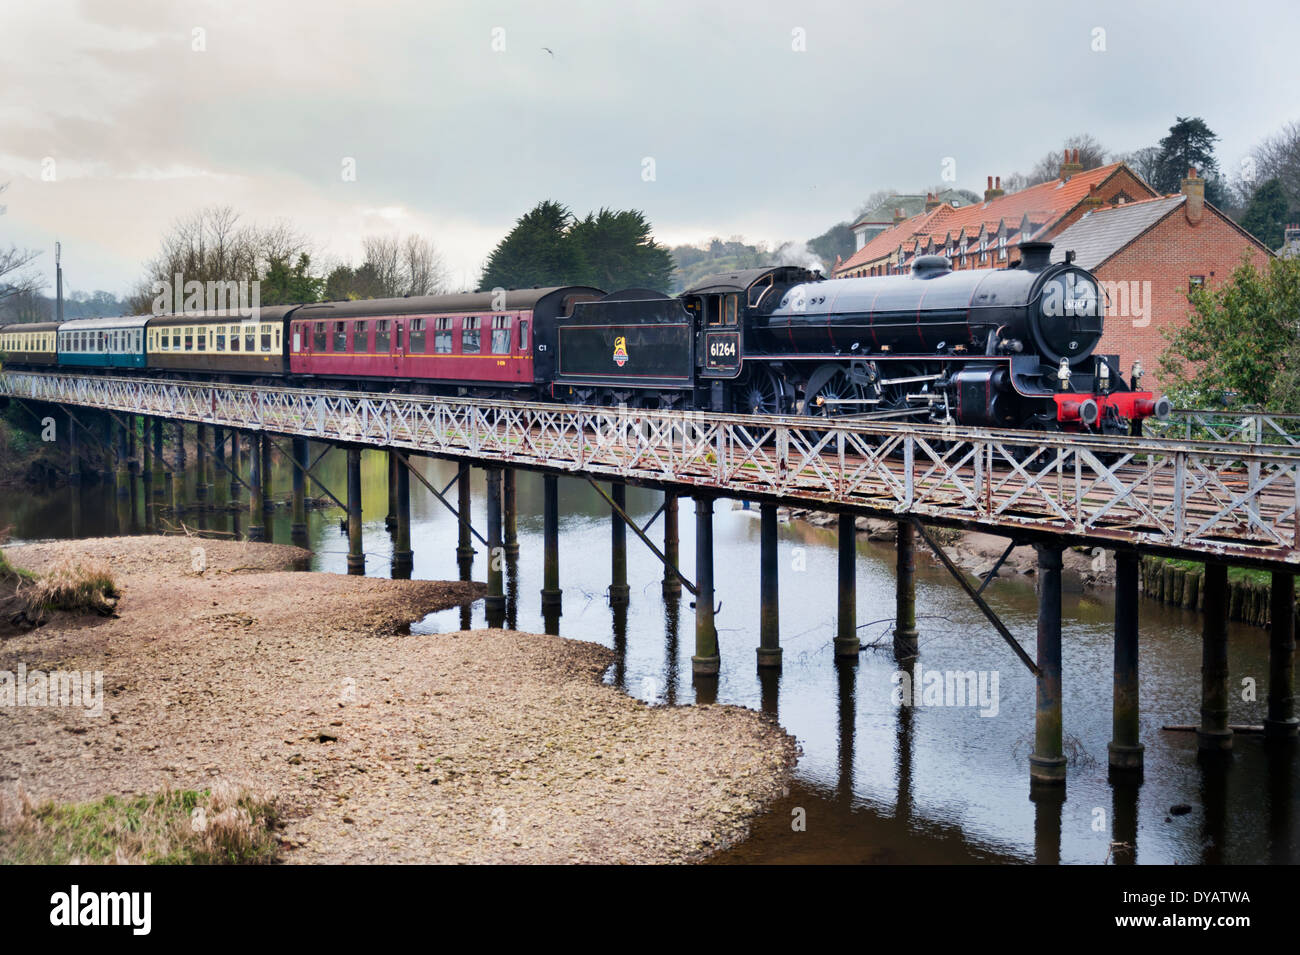 Thompson B1 steam locomotive from the NYMR railway crosses the bridge over the River Esk at Ruswarp on way to the seaside resort of Whitby, 2014. Stock Photo